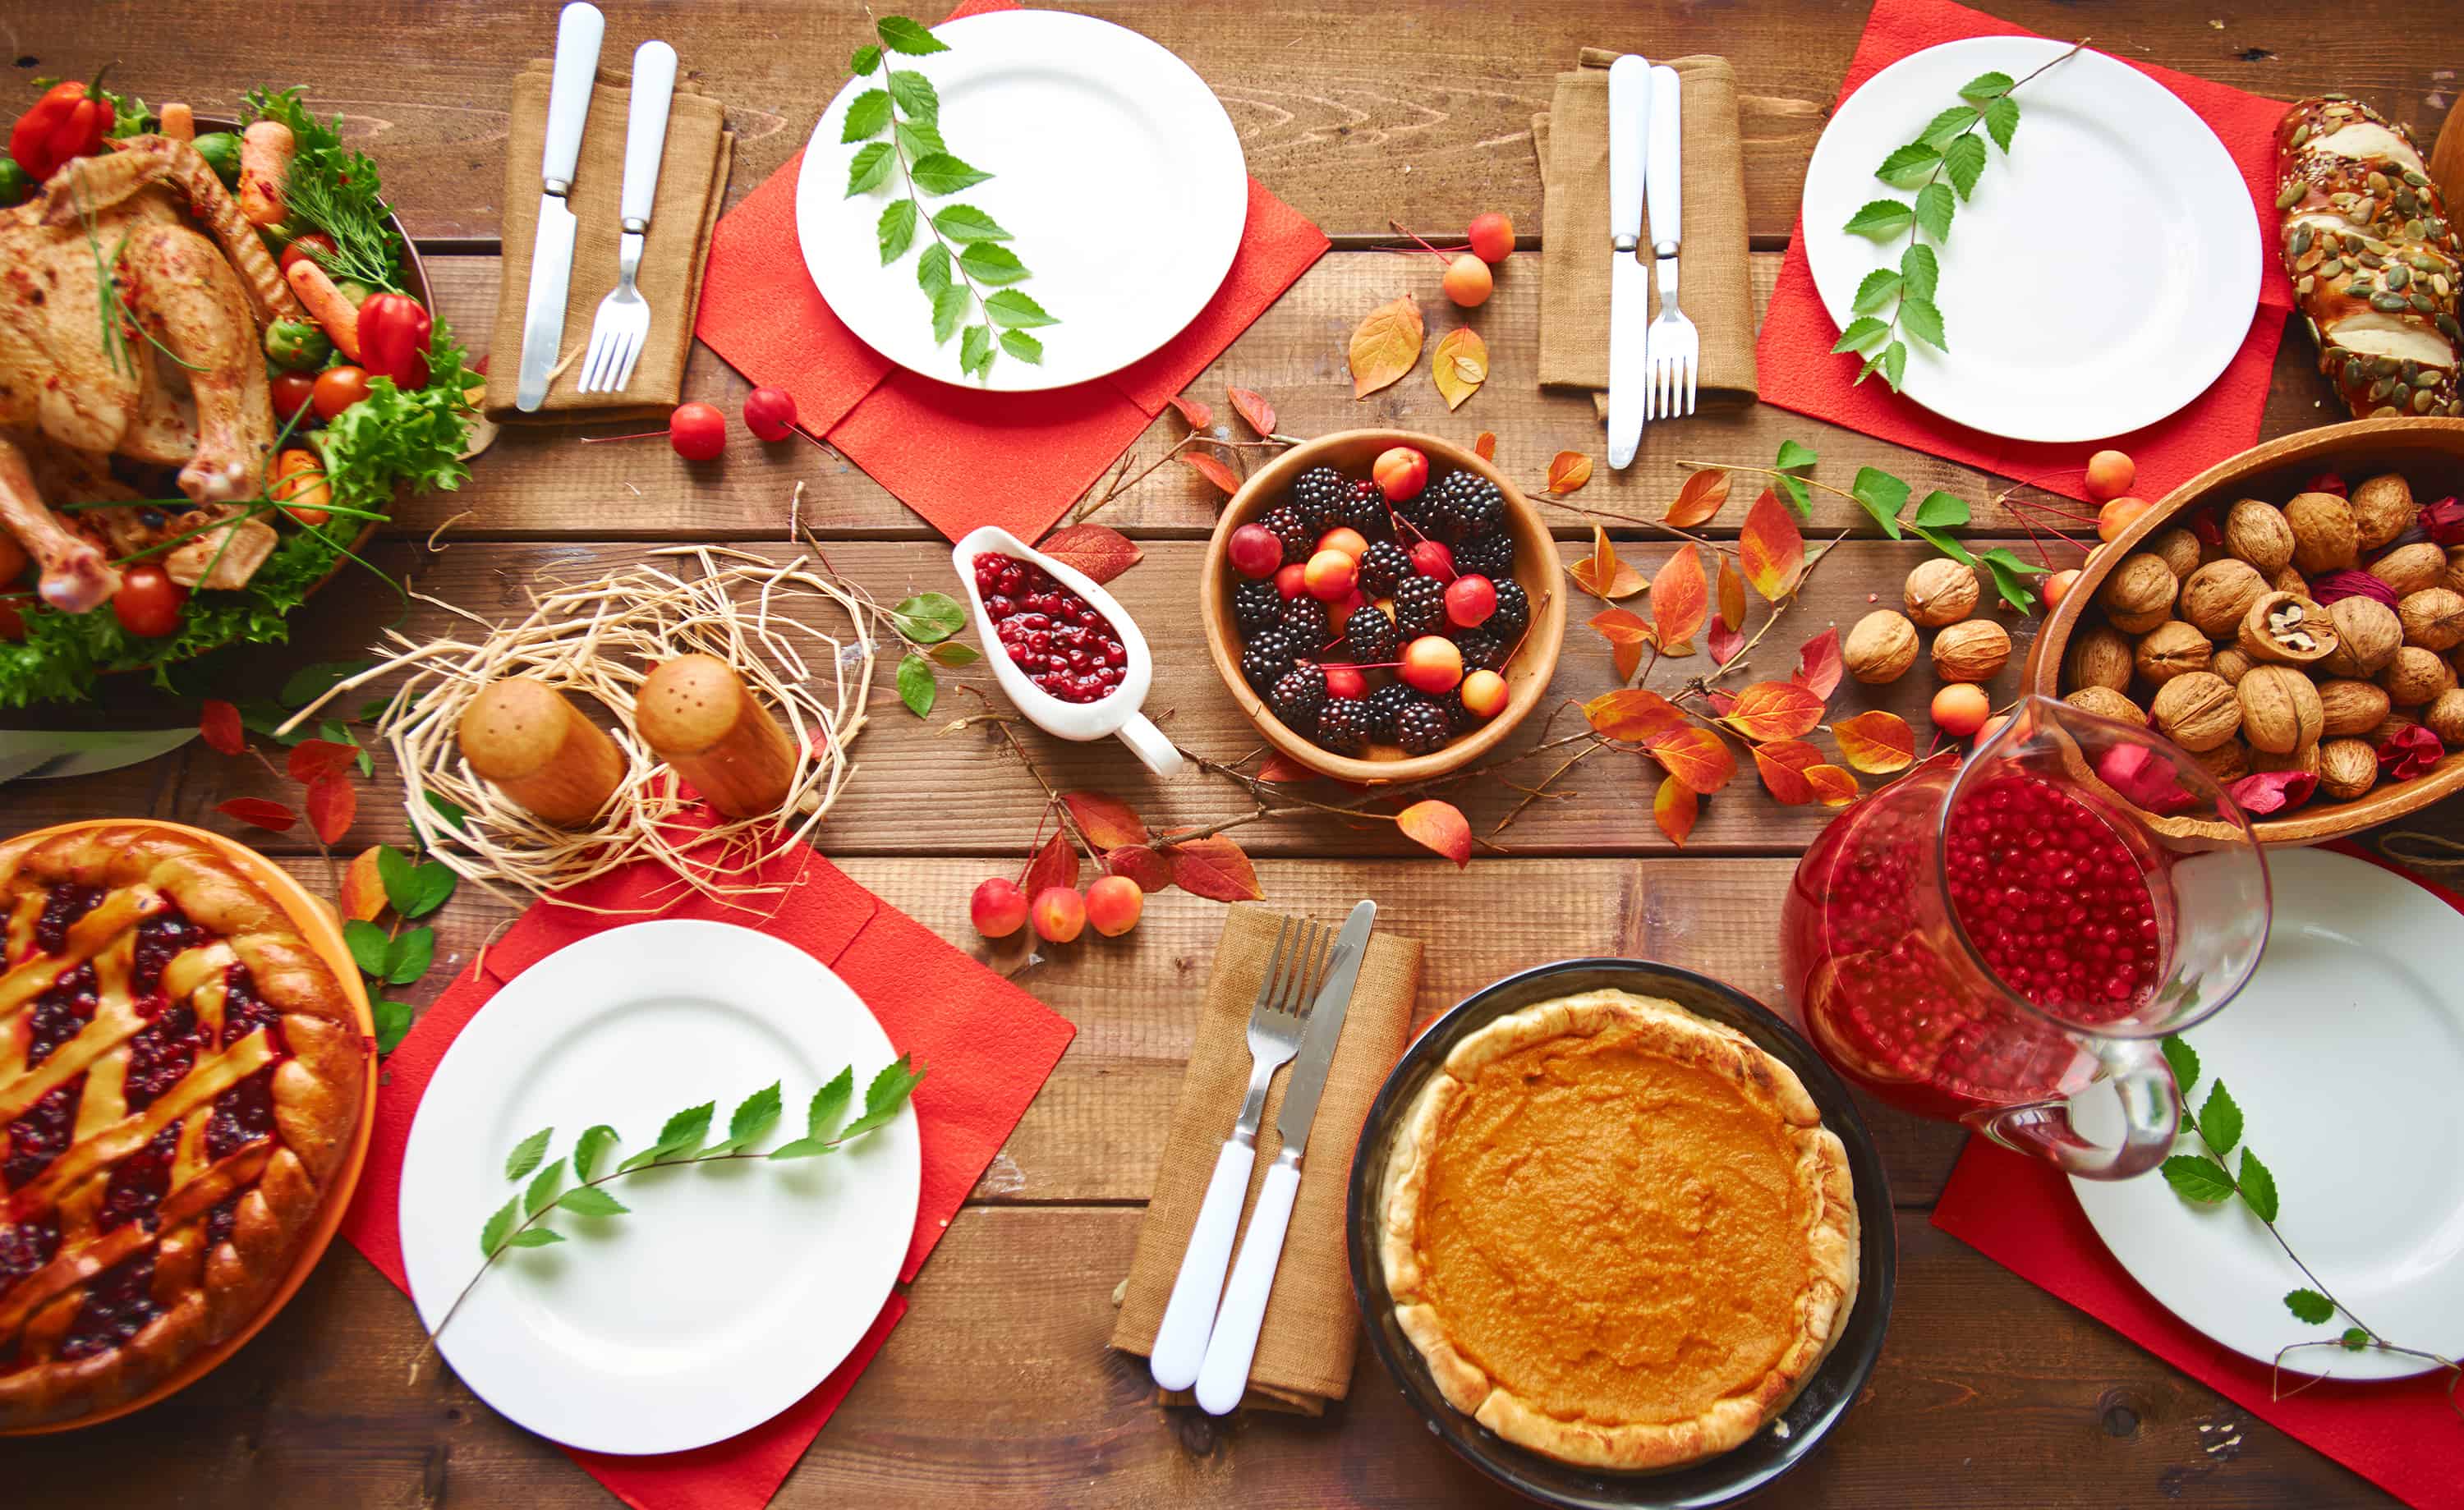 AgAmerica Thanksgiving Ag Recipes with Corn, Sweet Potatoes, and Turkey - AgAmerica